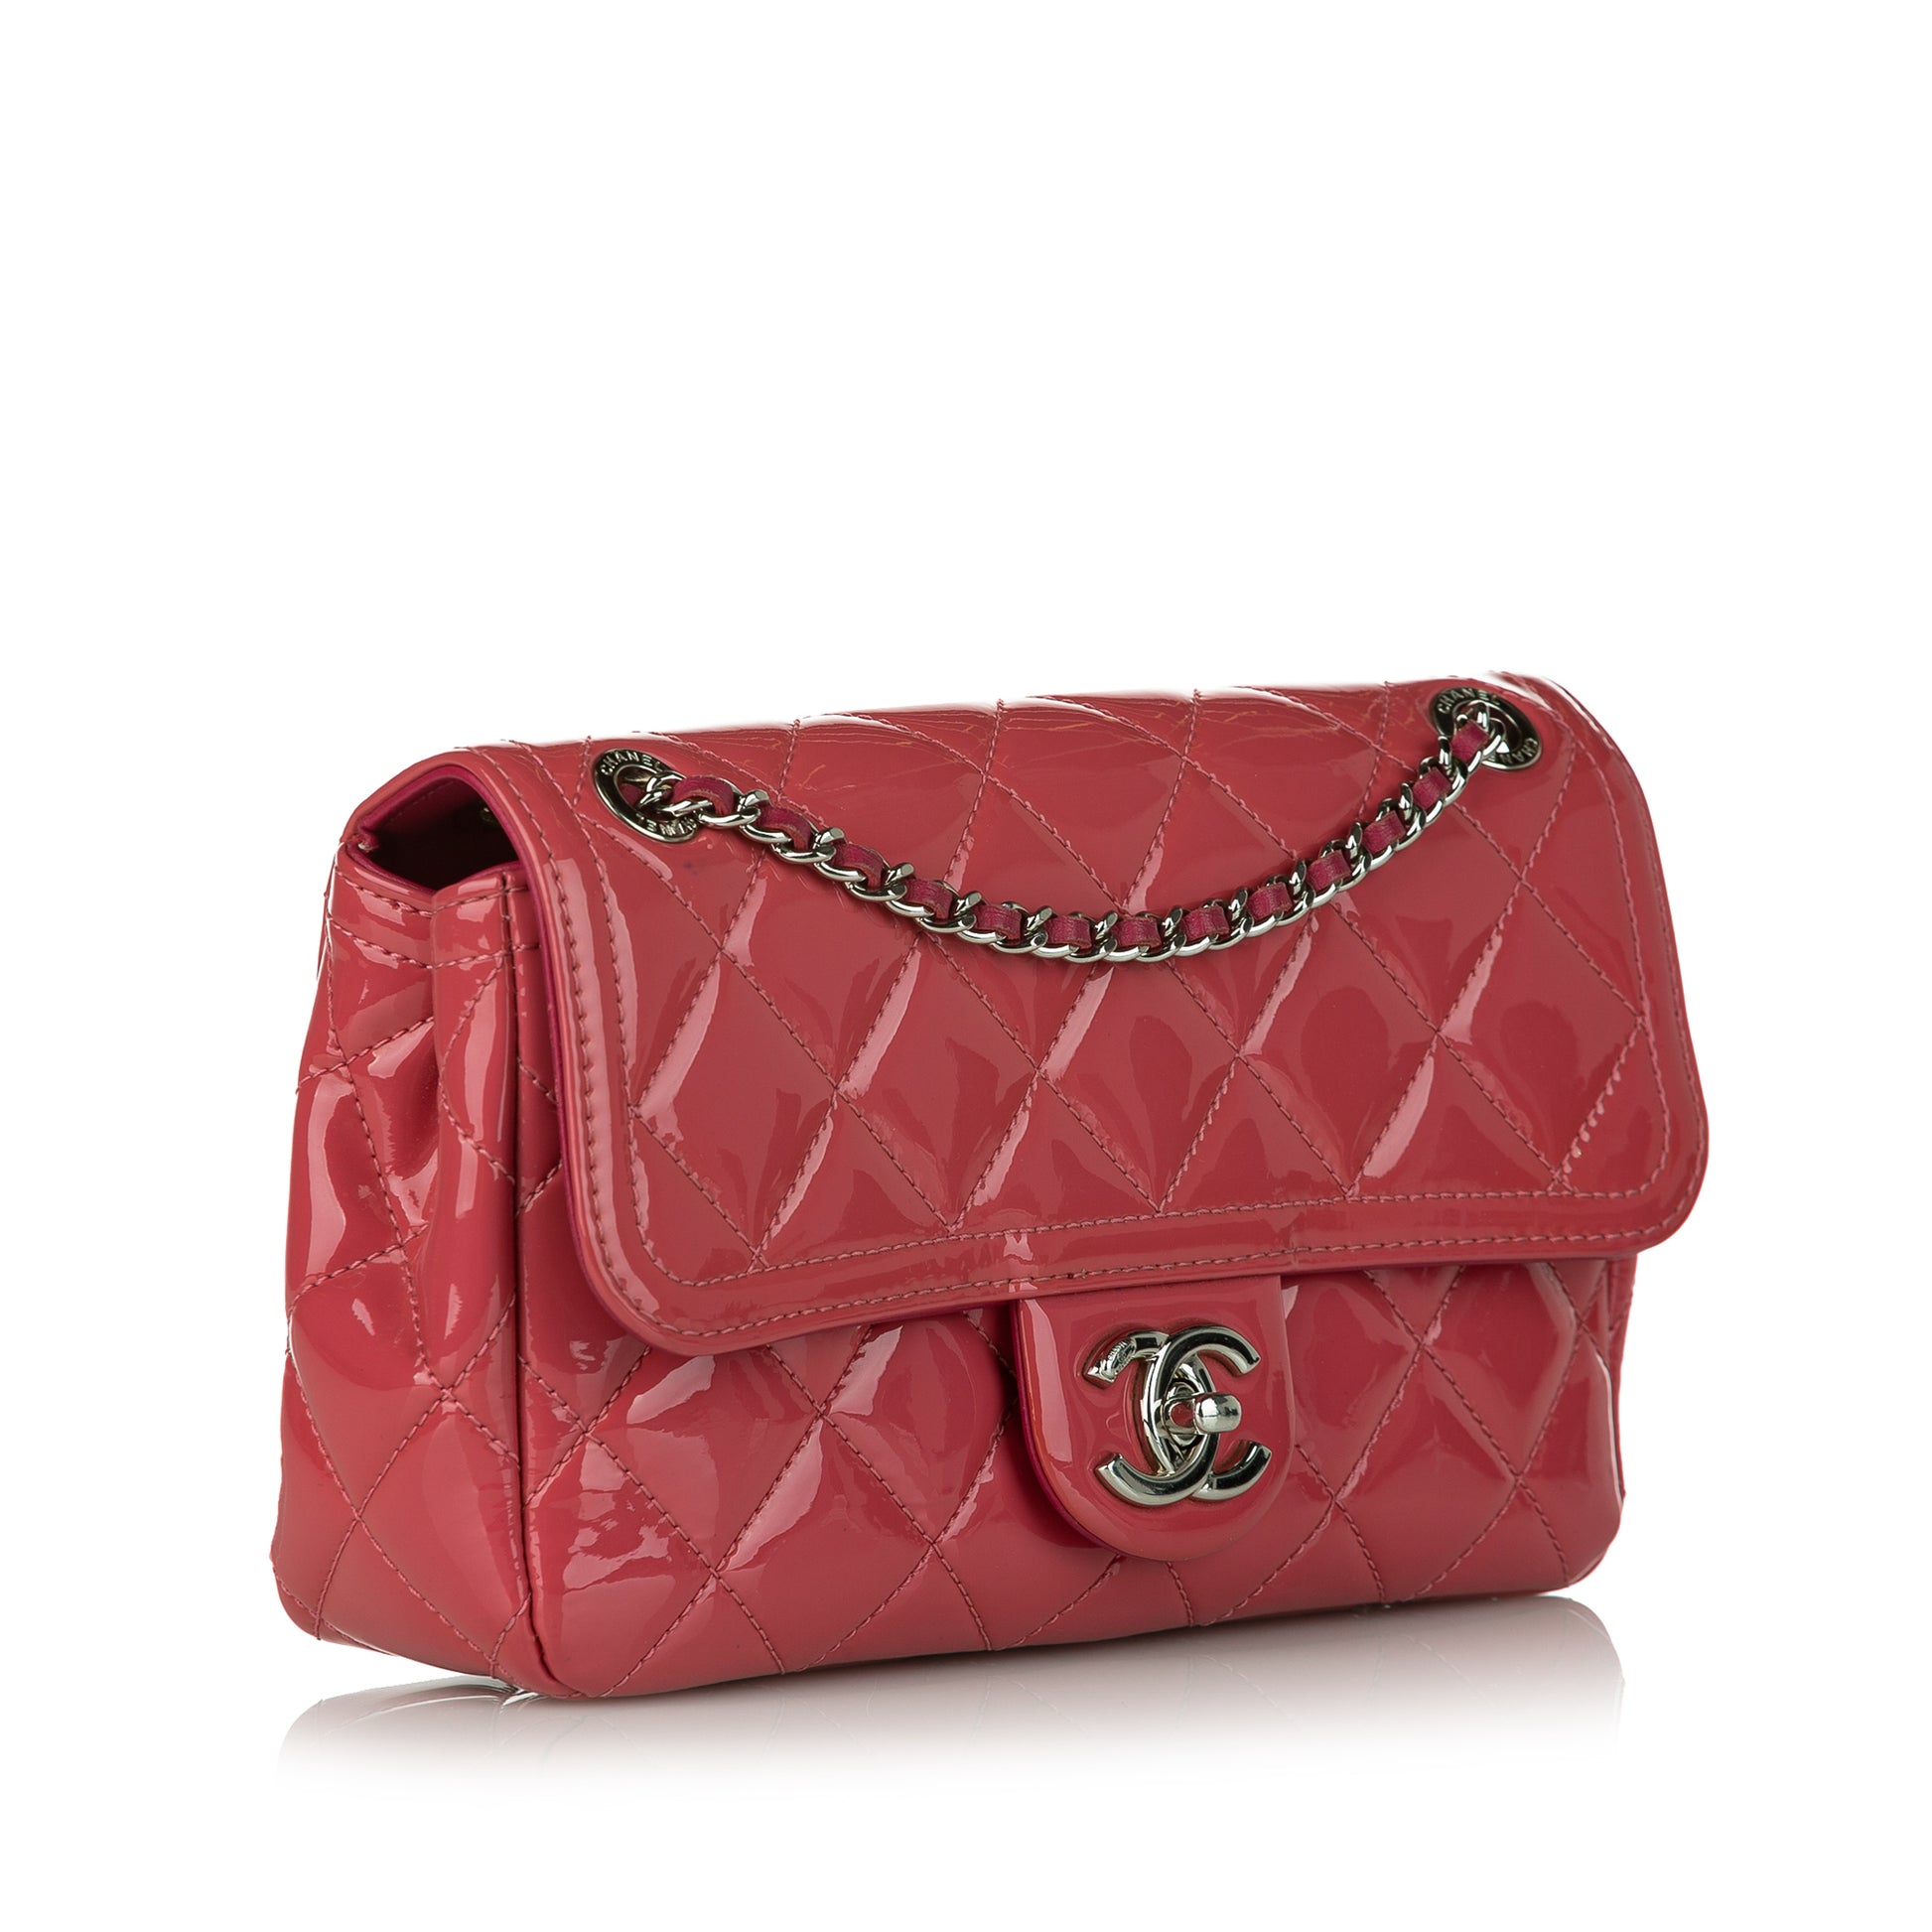 Small Coco Shine Patent Leather Flap Bag Red - Gaby Paris